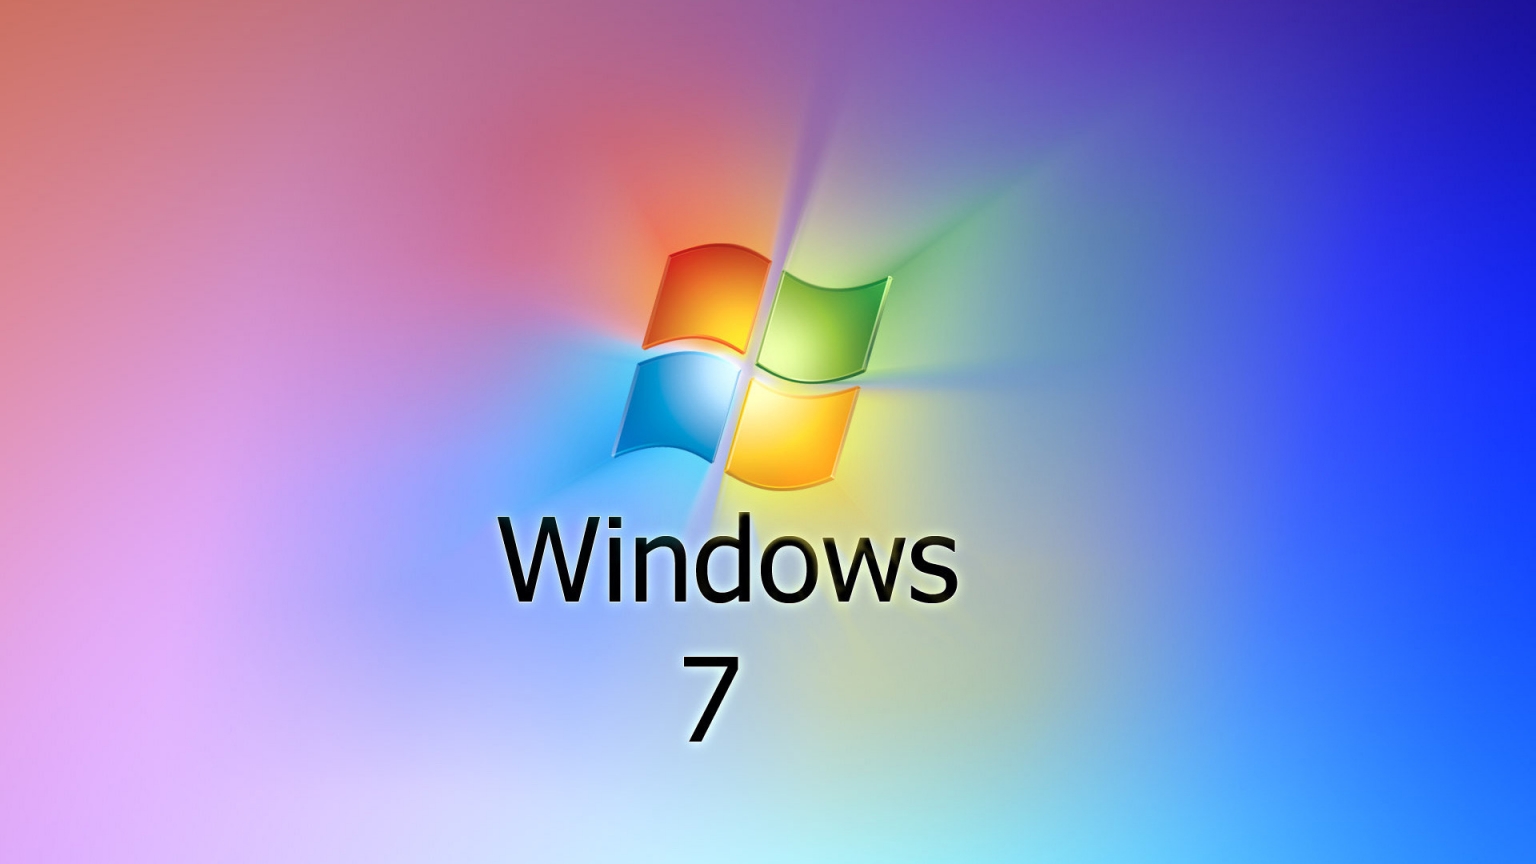 Windows 7 Simple for 1536 x 864 HDTV resolution